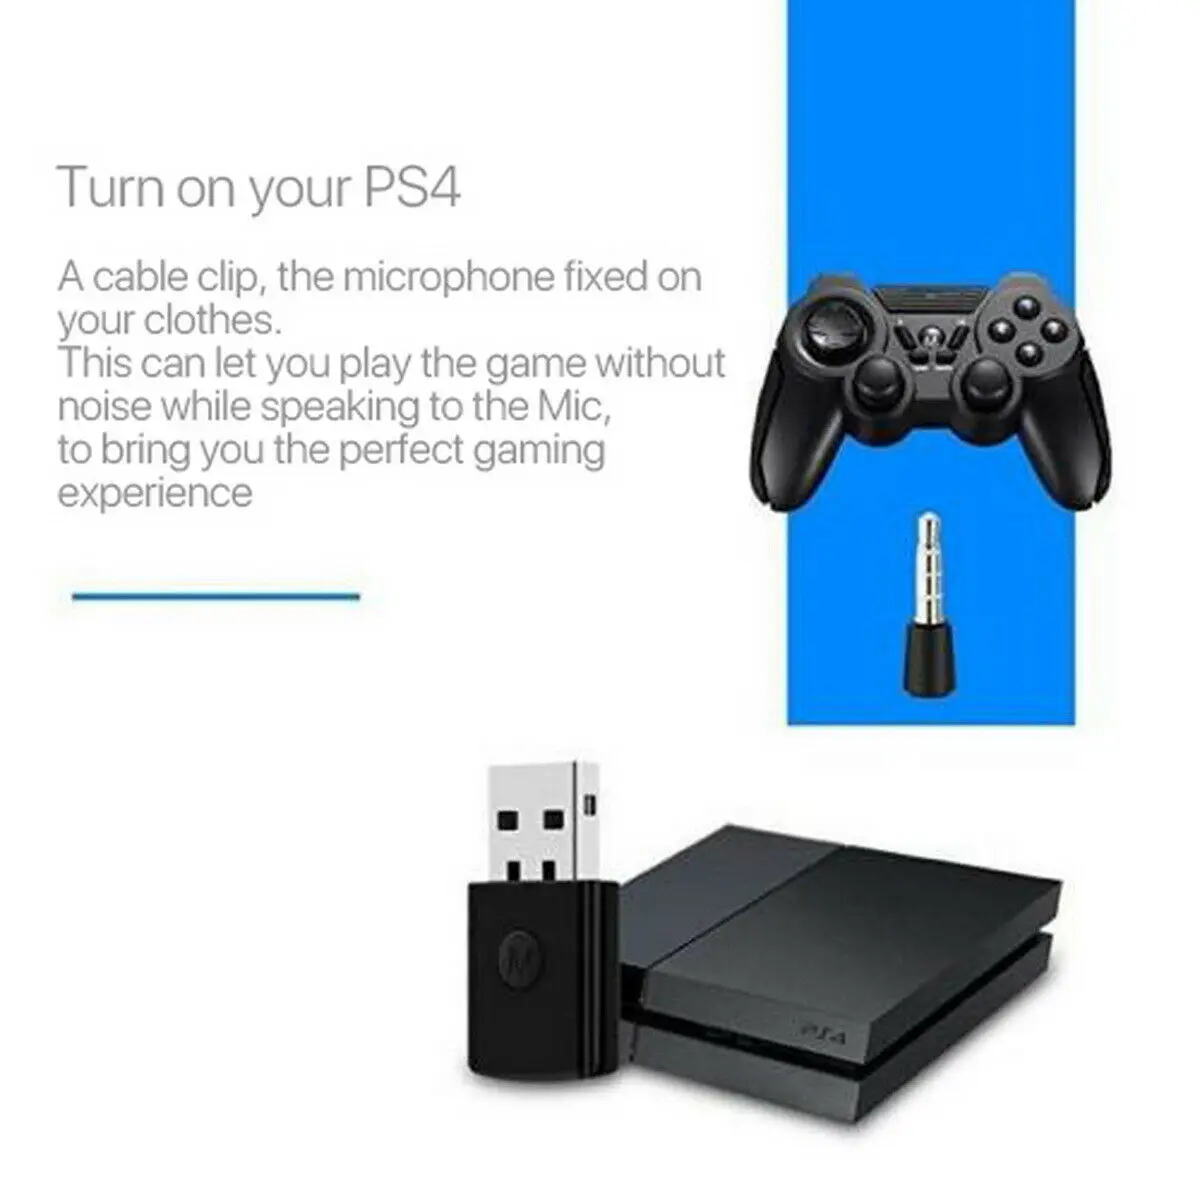 Wireless Mini Bluetooth USB Dongle Receiver Adapter for PS4 Sound Headset AC887 